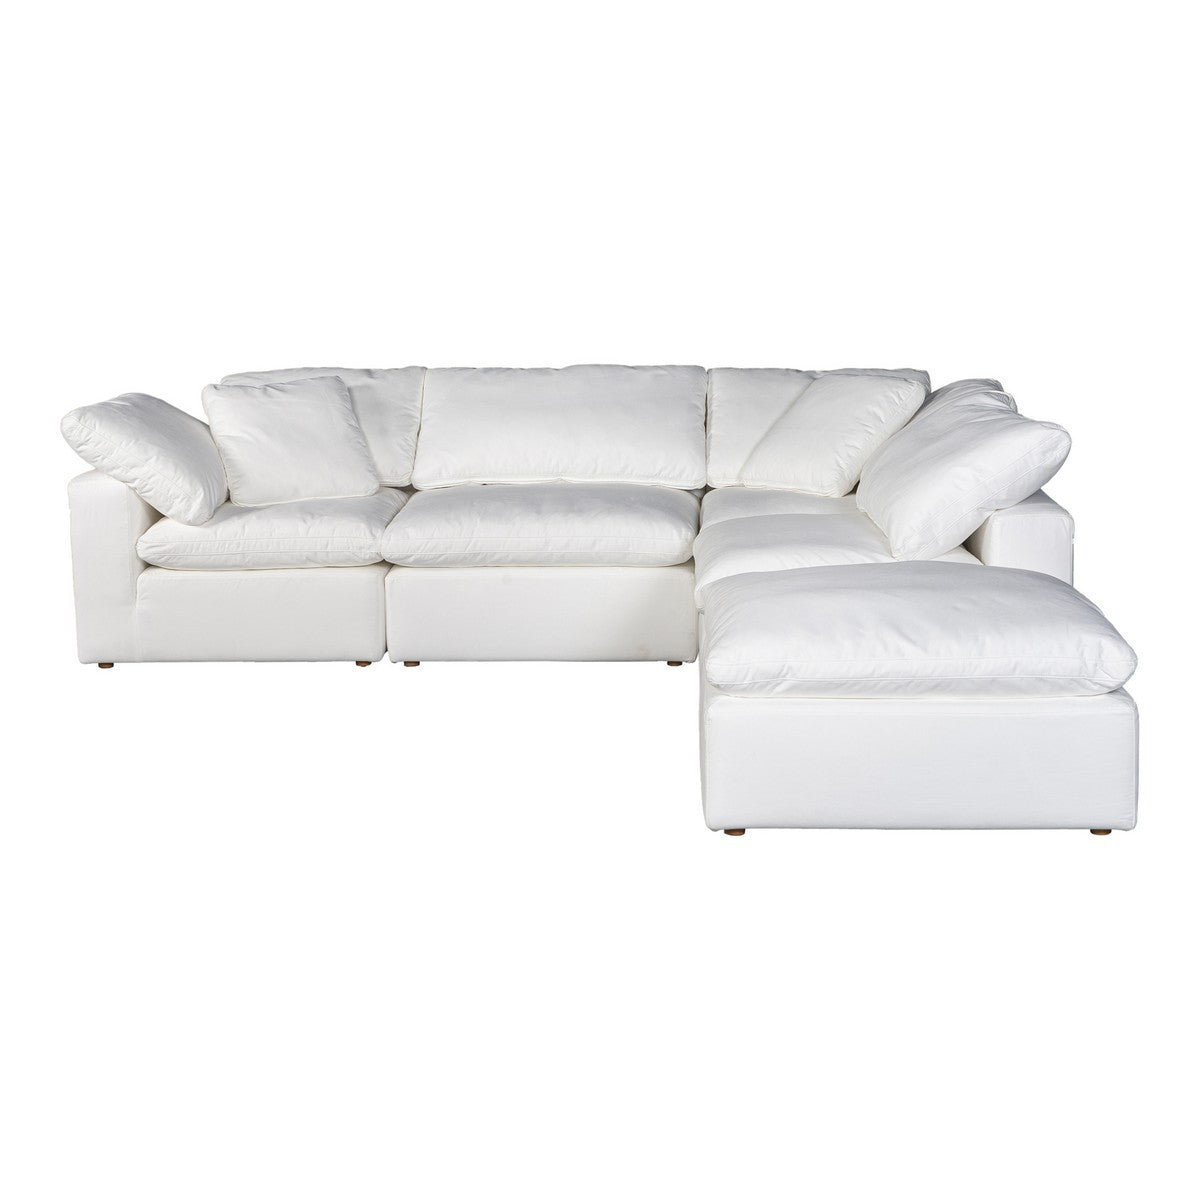 Moe's Home Collection Clay Dream Modular Sectional Livesmart Fabric Cream - YJ-1011-05 - Moe's Home Collection - Extras - Minimal And Modern - 1